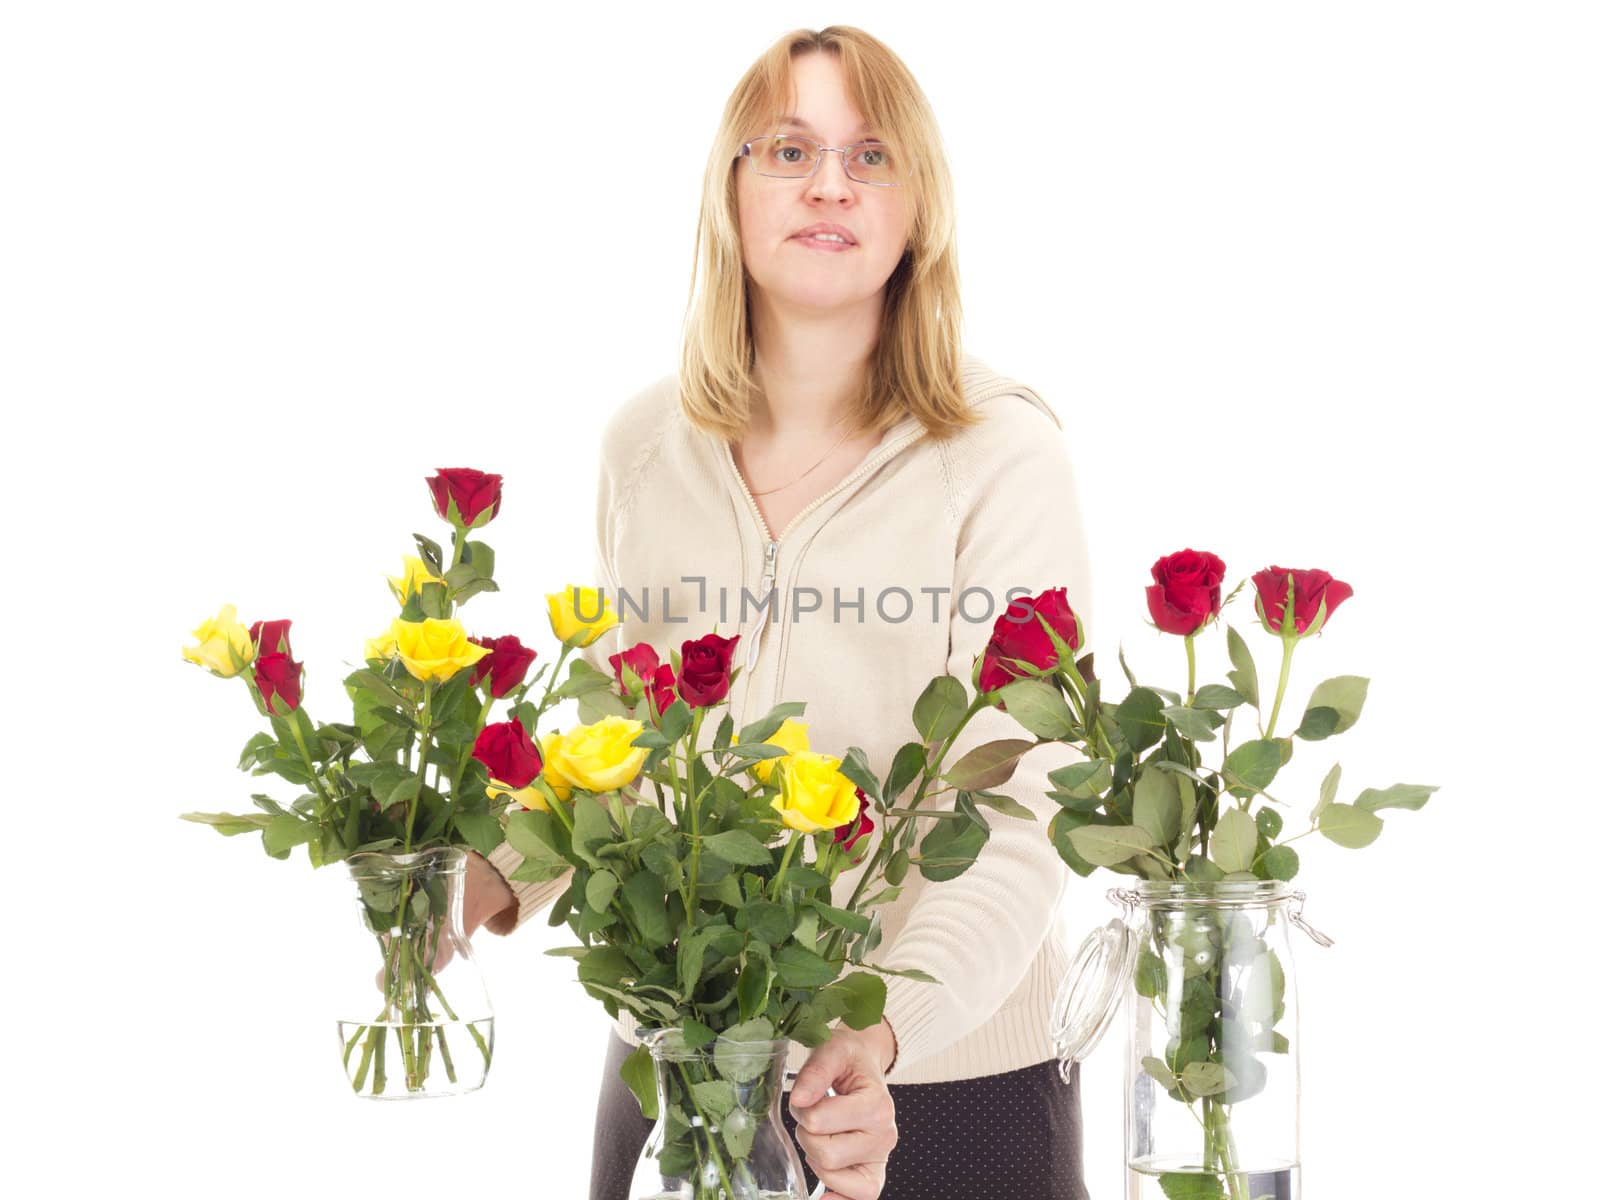 Florist with beautiful roses by gwolters